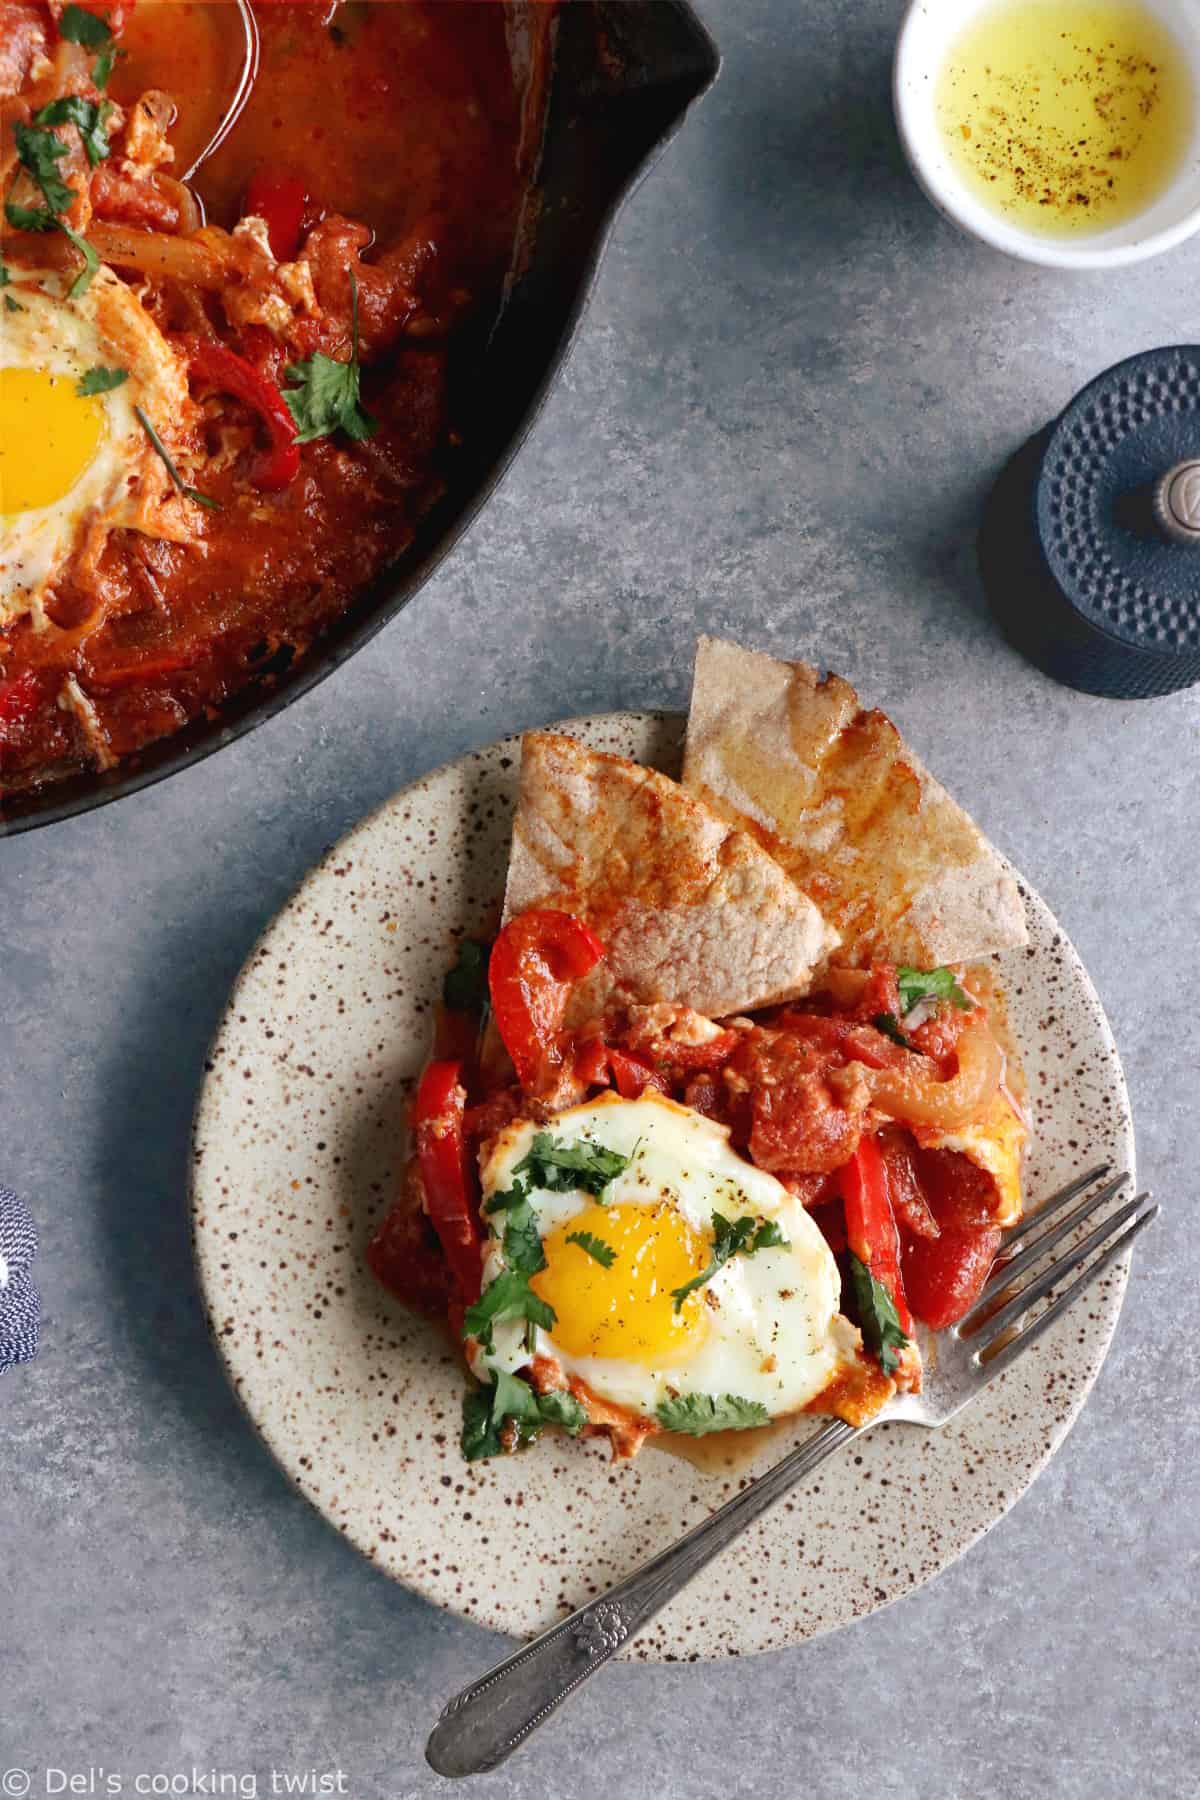 Shakshuka with Feta Cheese is a simple dish consisting of poached eggs in a simmering tomato sauce with feta and spices, traditionally served in a cast iron skillet.